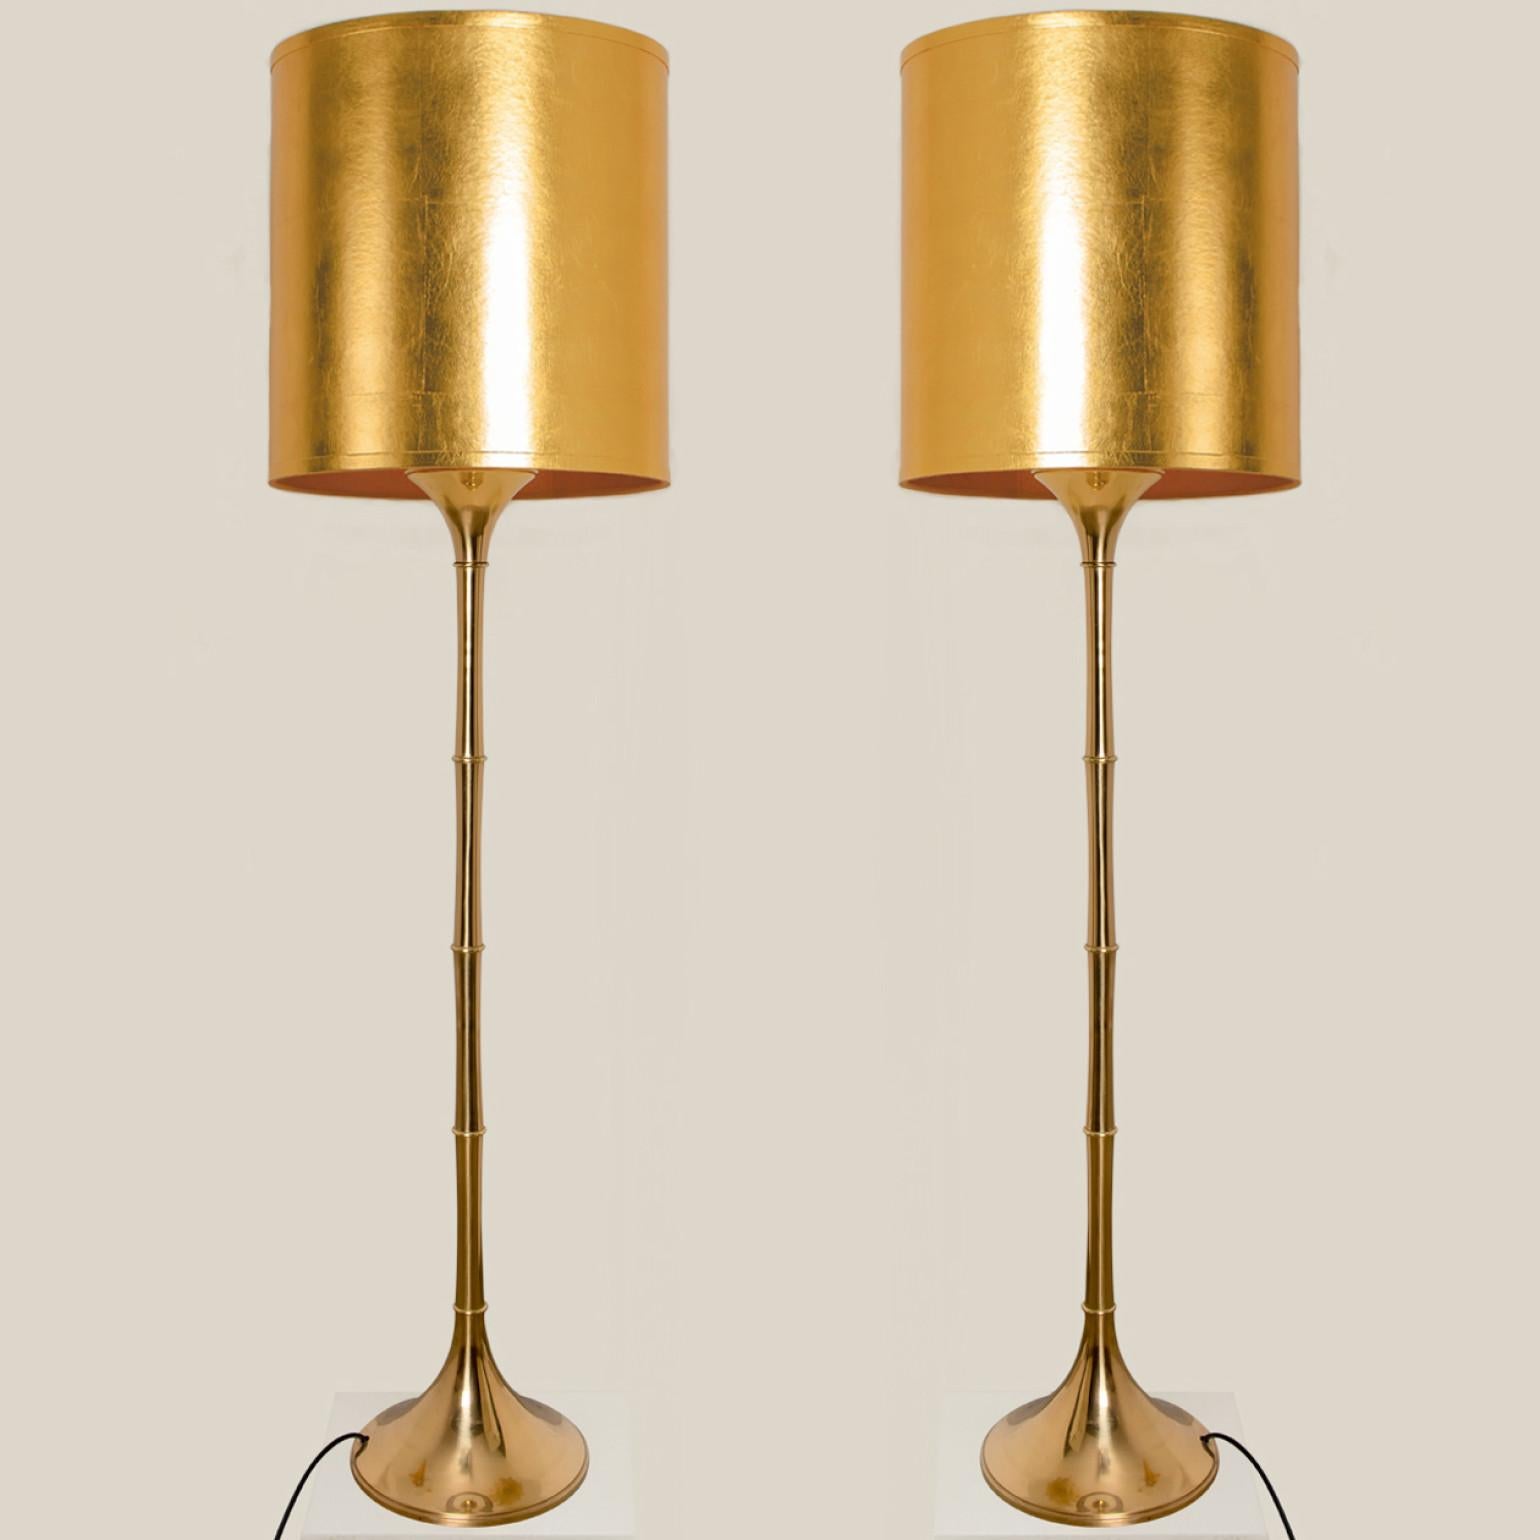 Elegant brass bamboo floor lamps Model designed by Ingo Maurer, 1968 for Design M Munich, Germany.
With new gold metal custom made lamp shades with Bronze inner shade. Made by Rene Houben. Also other lampshades available. Ask for additional